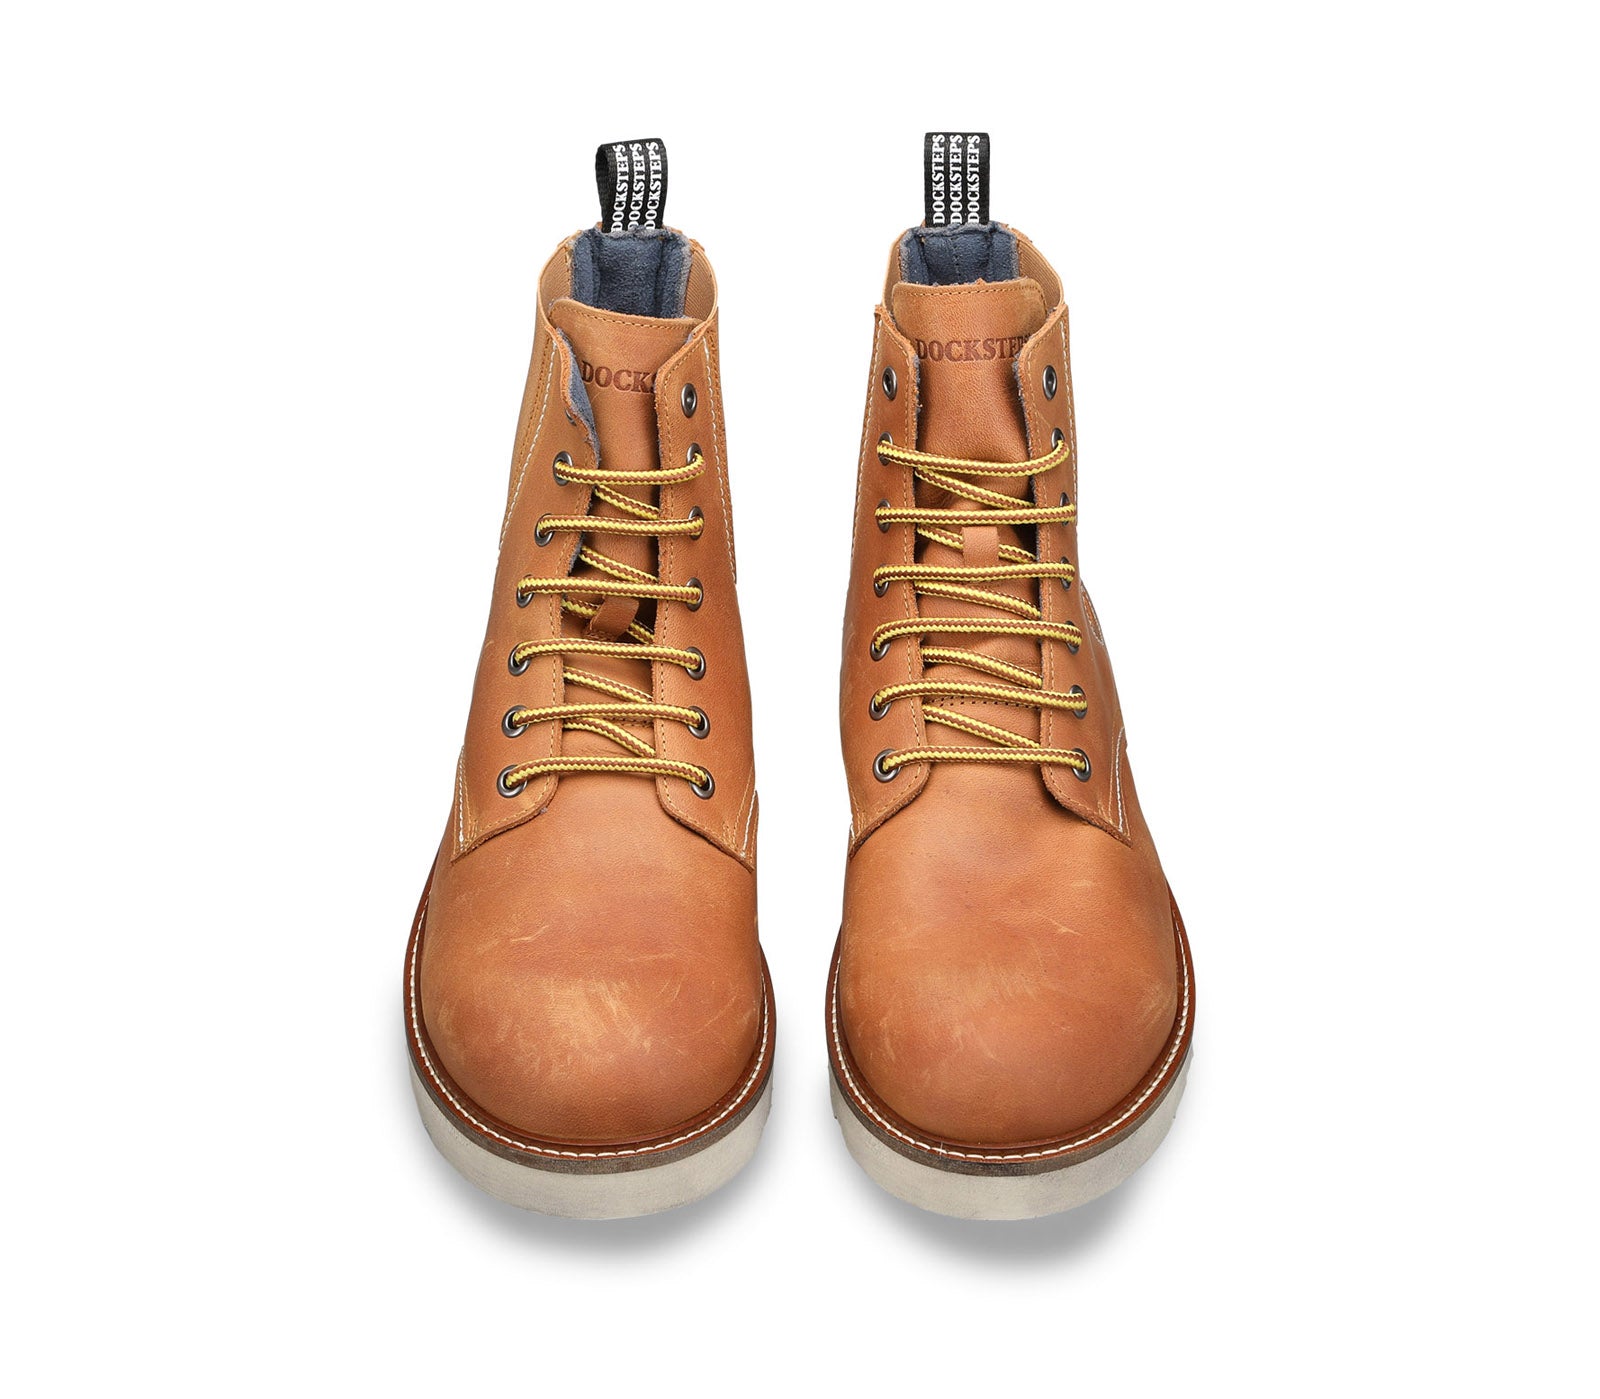 Men's leather boot with elastic band